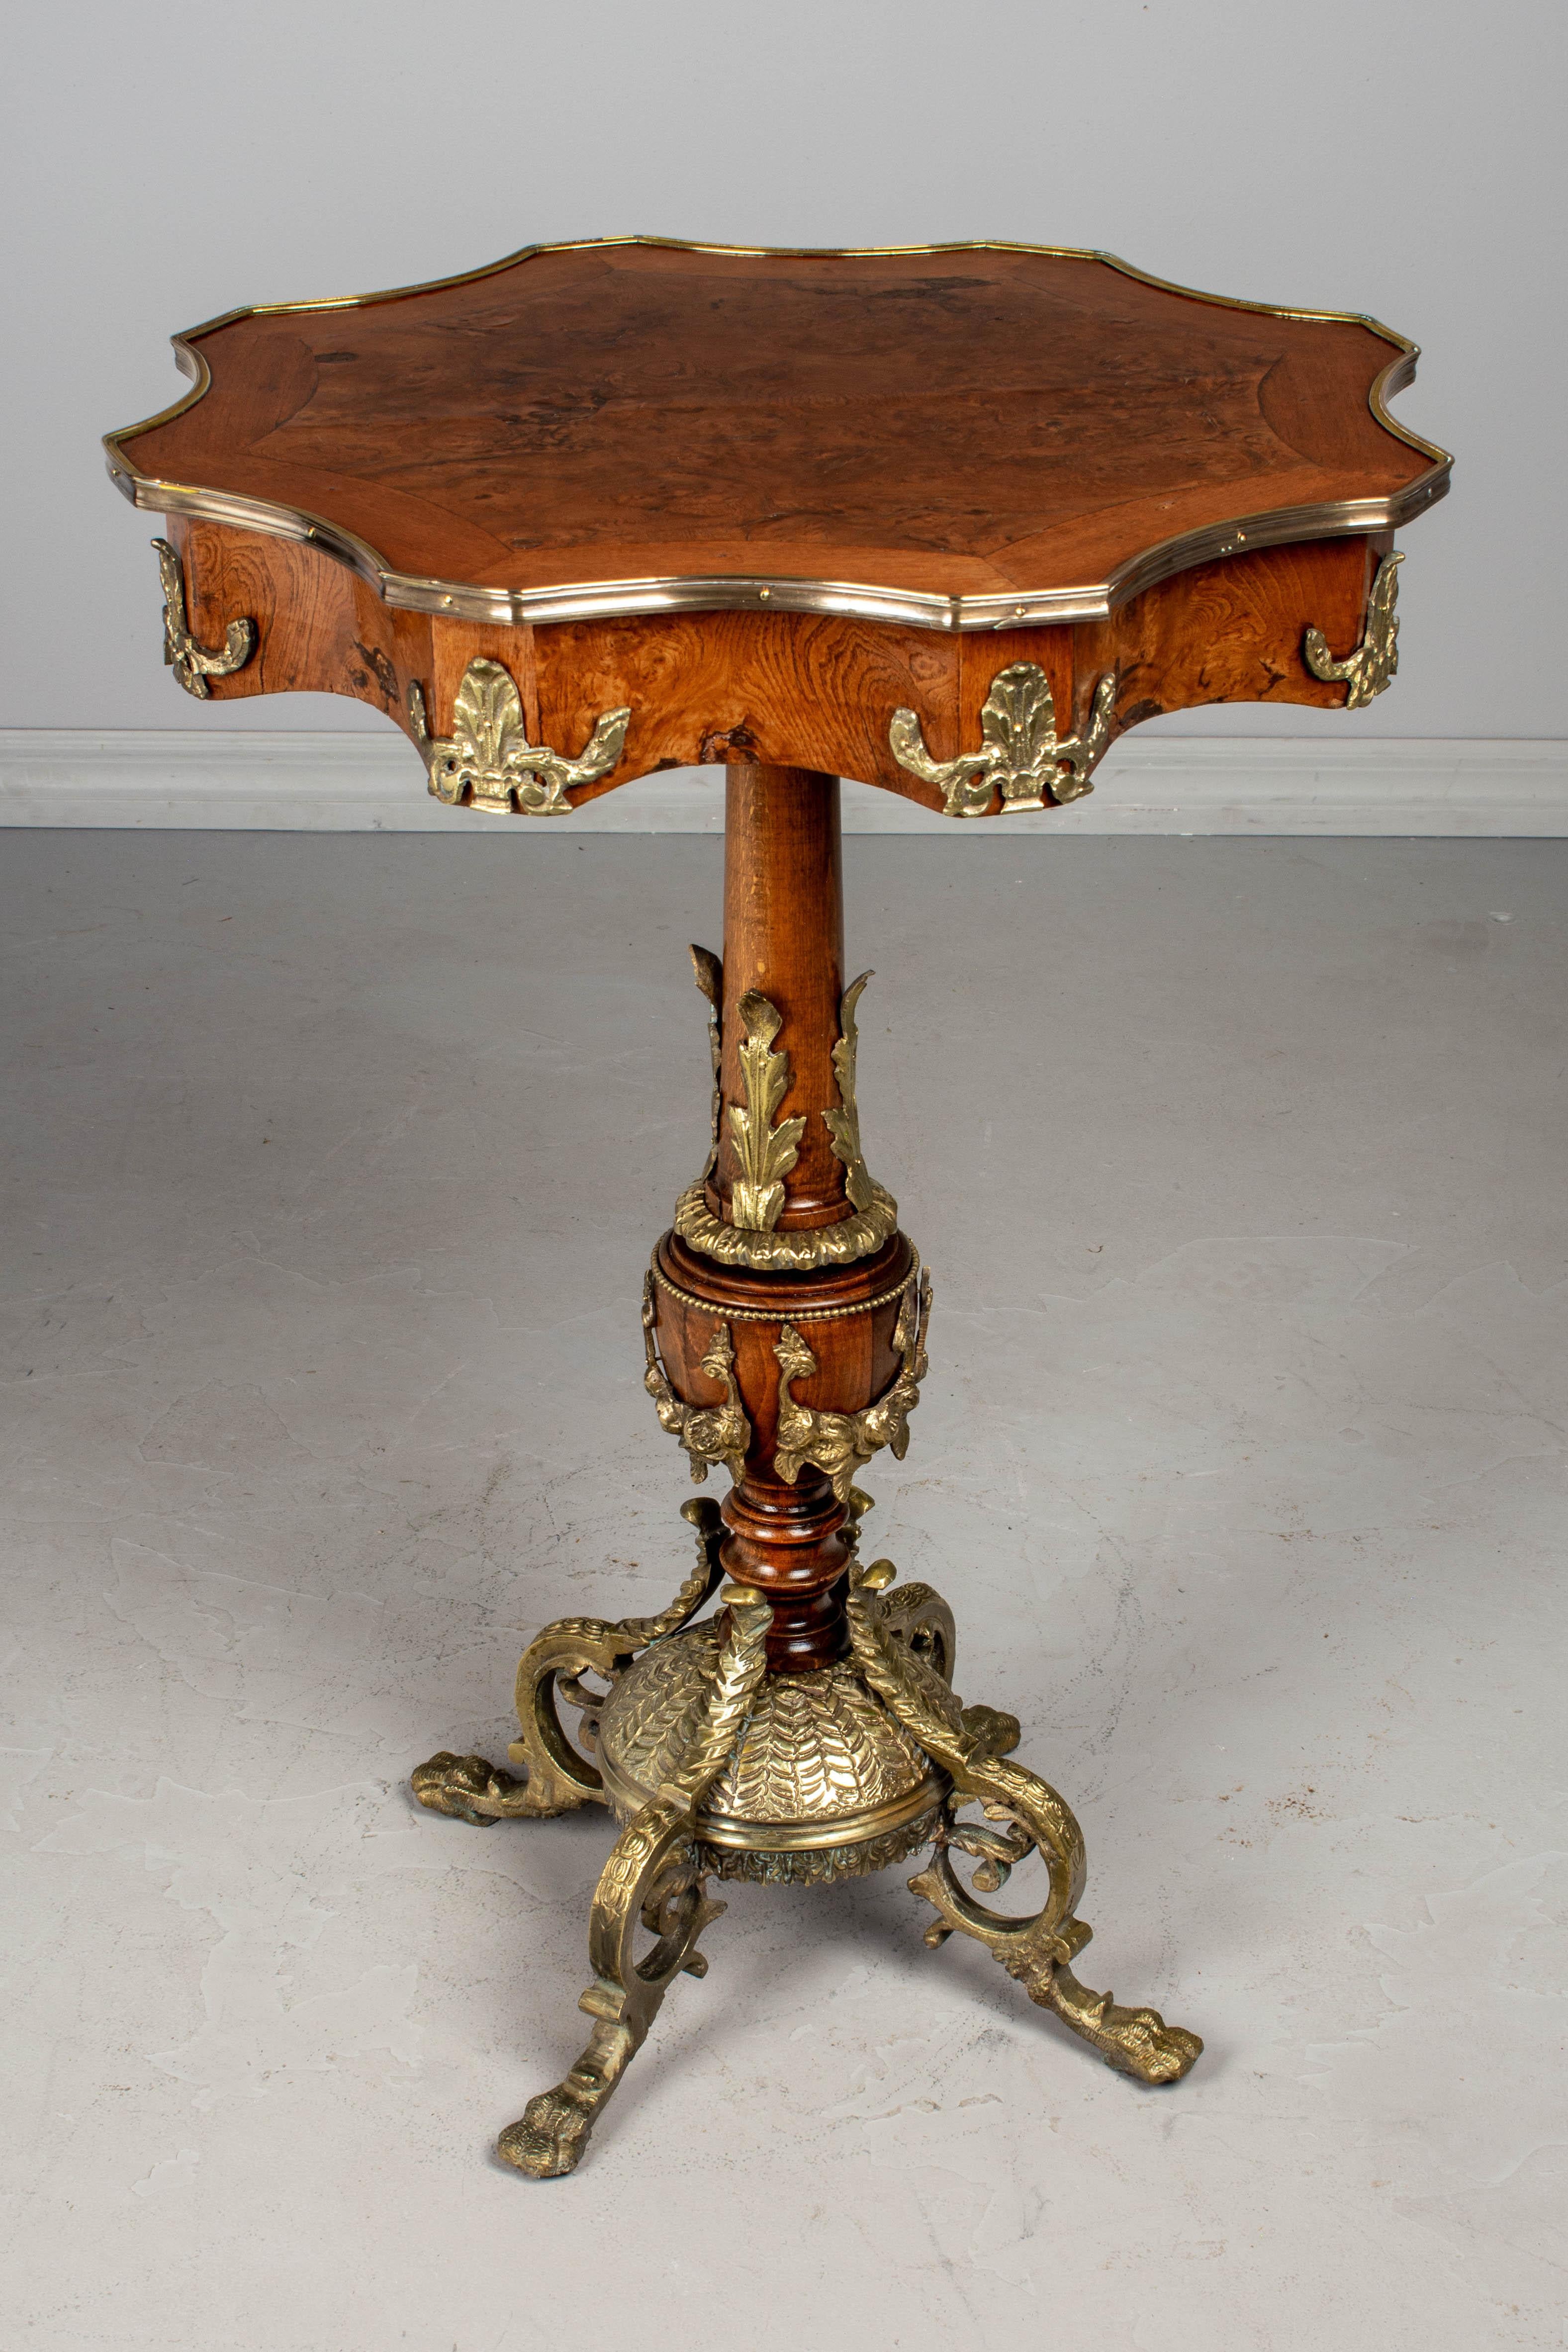 An exquisite 19th century French Napoleon III bronze mounted guéridon. This tall pedestal table has a shaped top made of veneer of walnut and beautifully patterned veneer of burled elm with bronze surround. French polish finish. The central turned